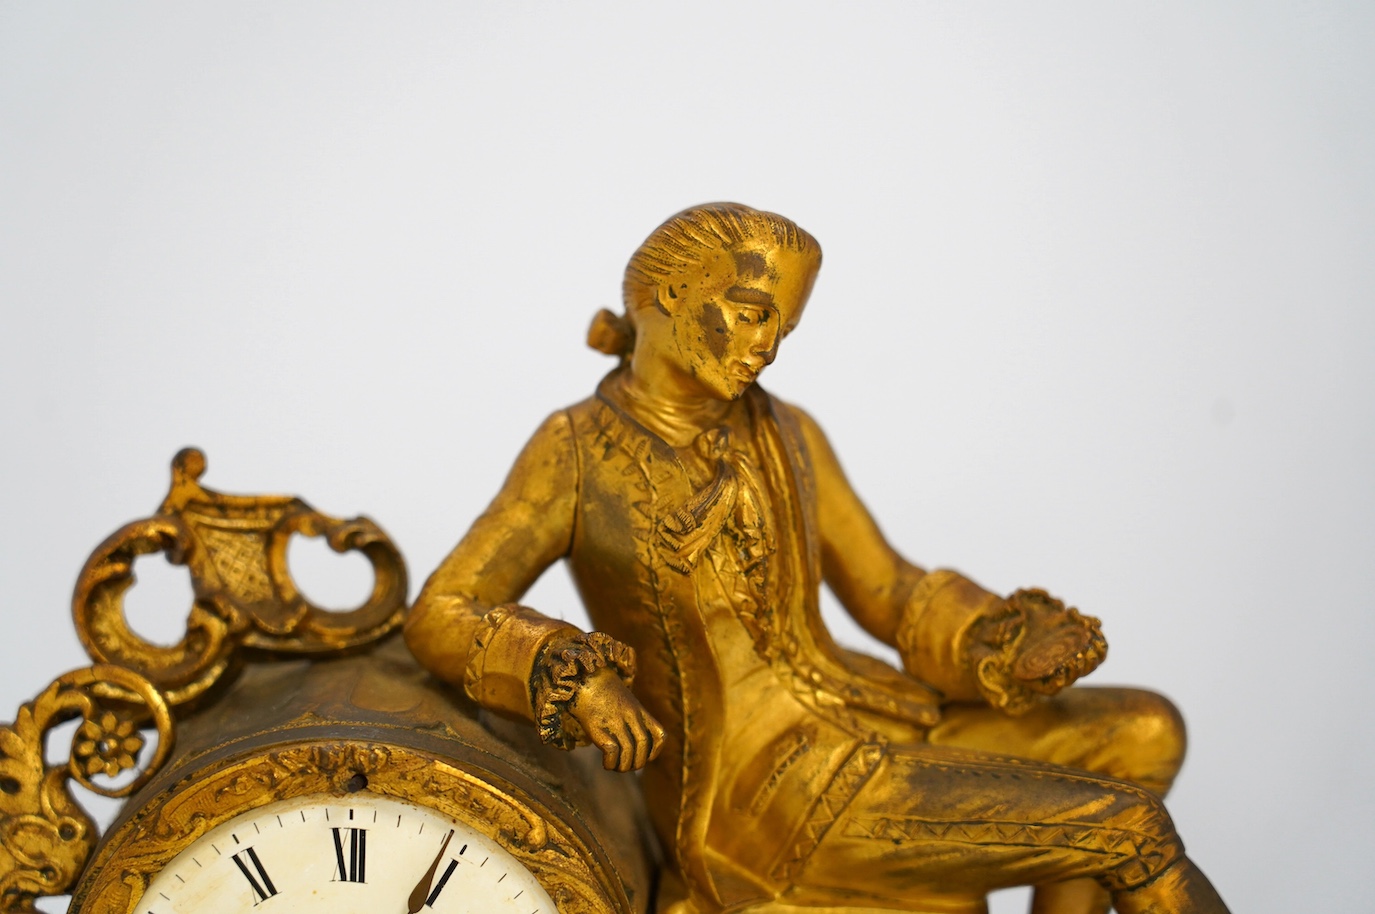 A 19th century figurative ormolu mantel clock, with floral porcelain panels, on stand with key and pendulum, stand approximately 39cm wide. Condition - clock dial cracked, clock untested as working